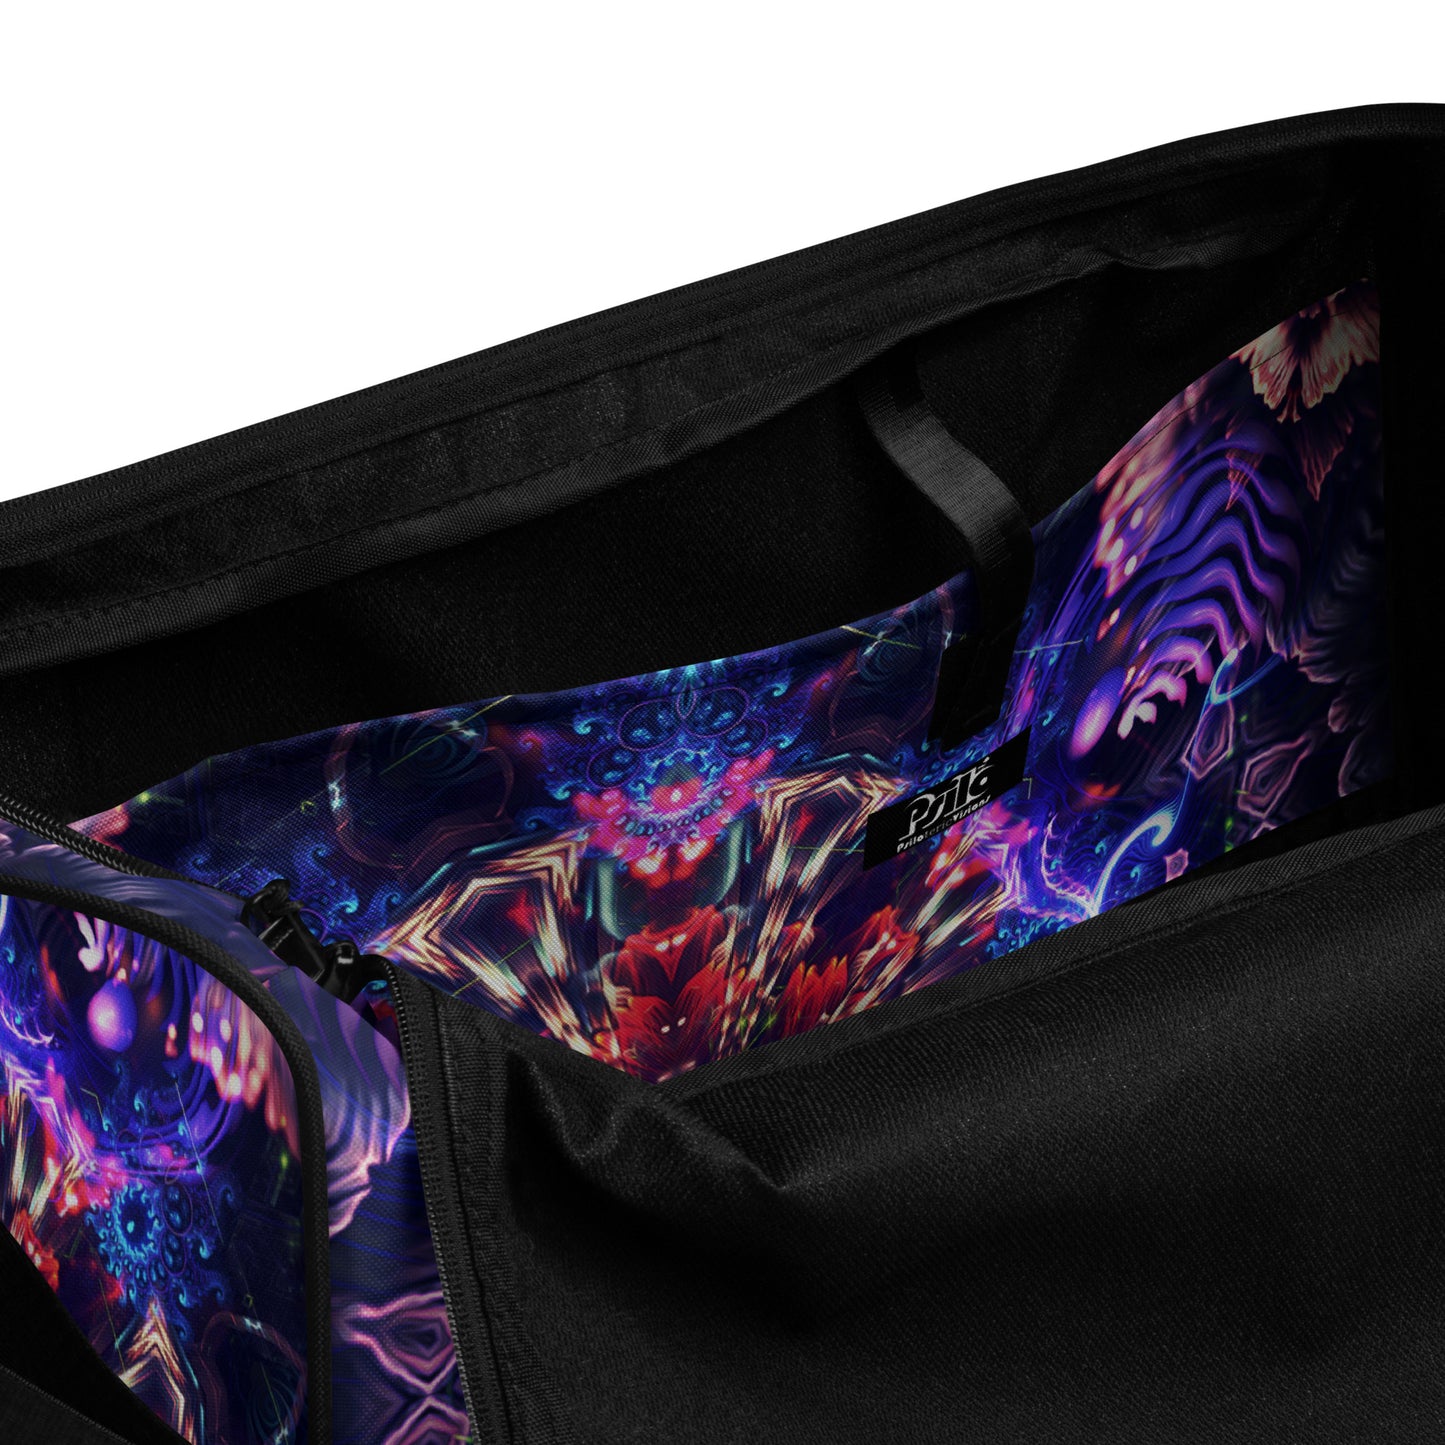 "Flow State" DUFFLE BAG